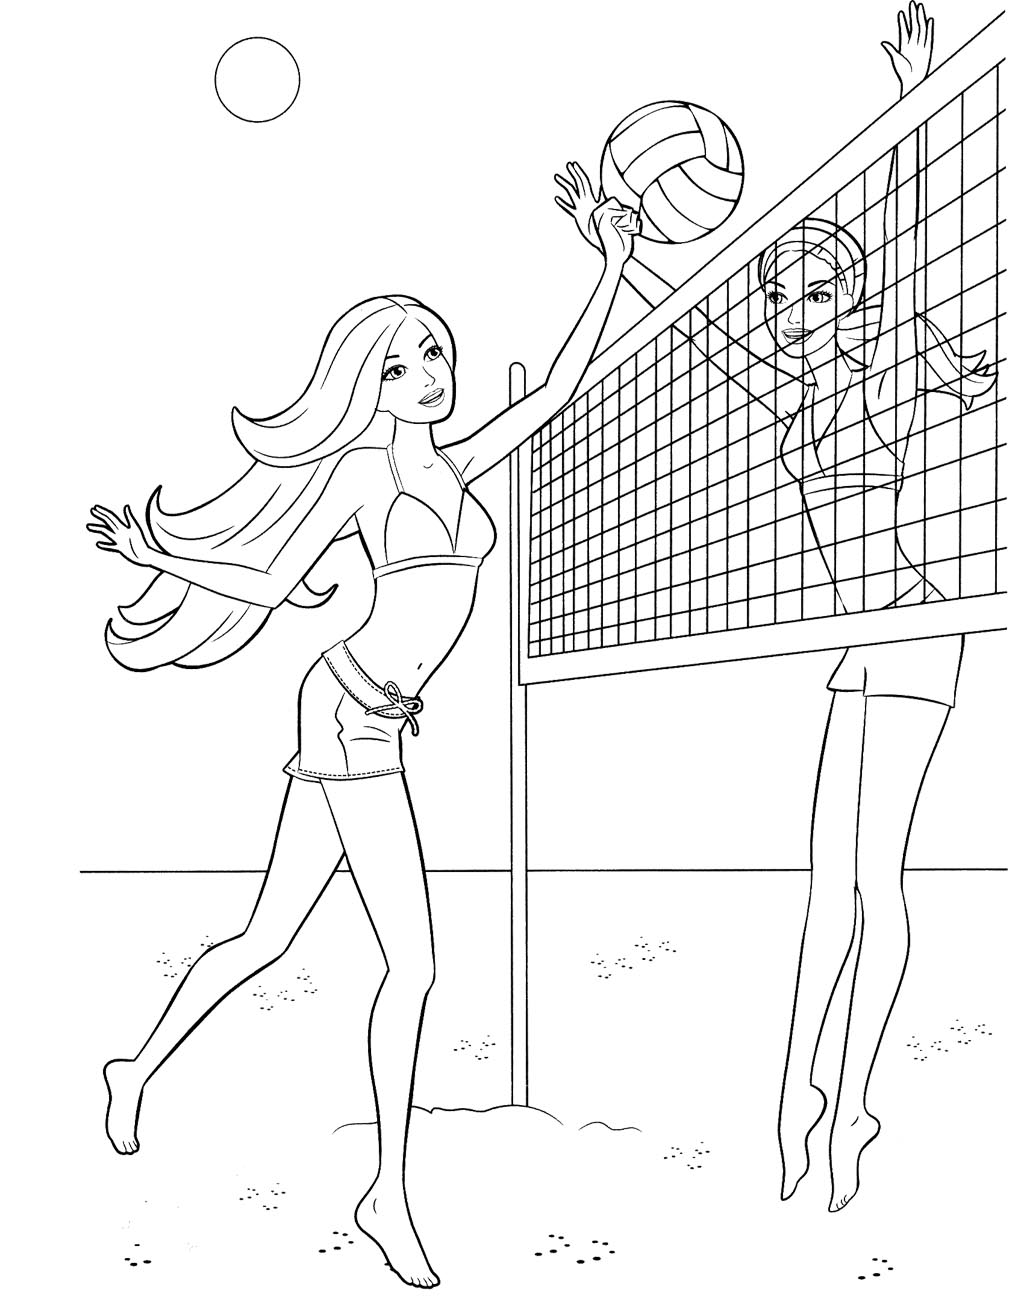 Image #17650 - Coloriage volleyball gratuit